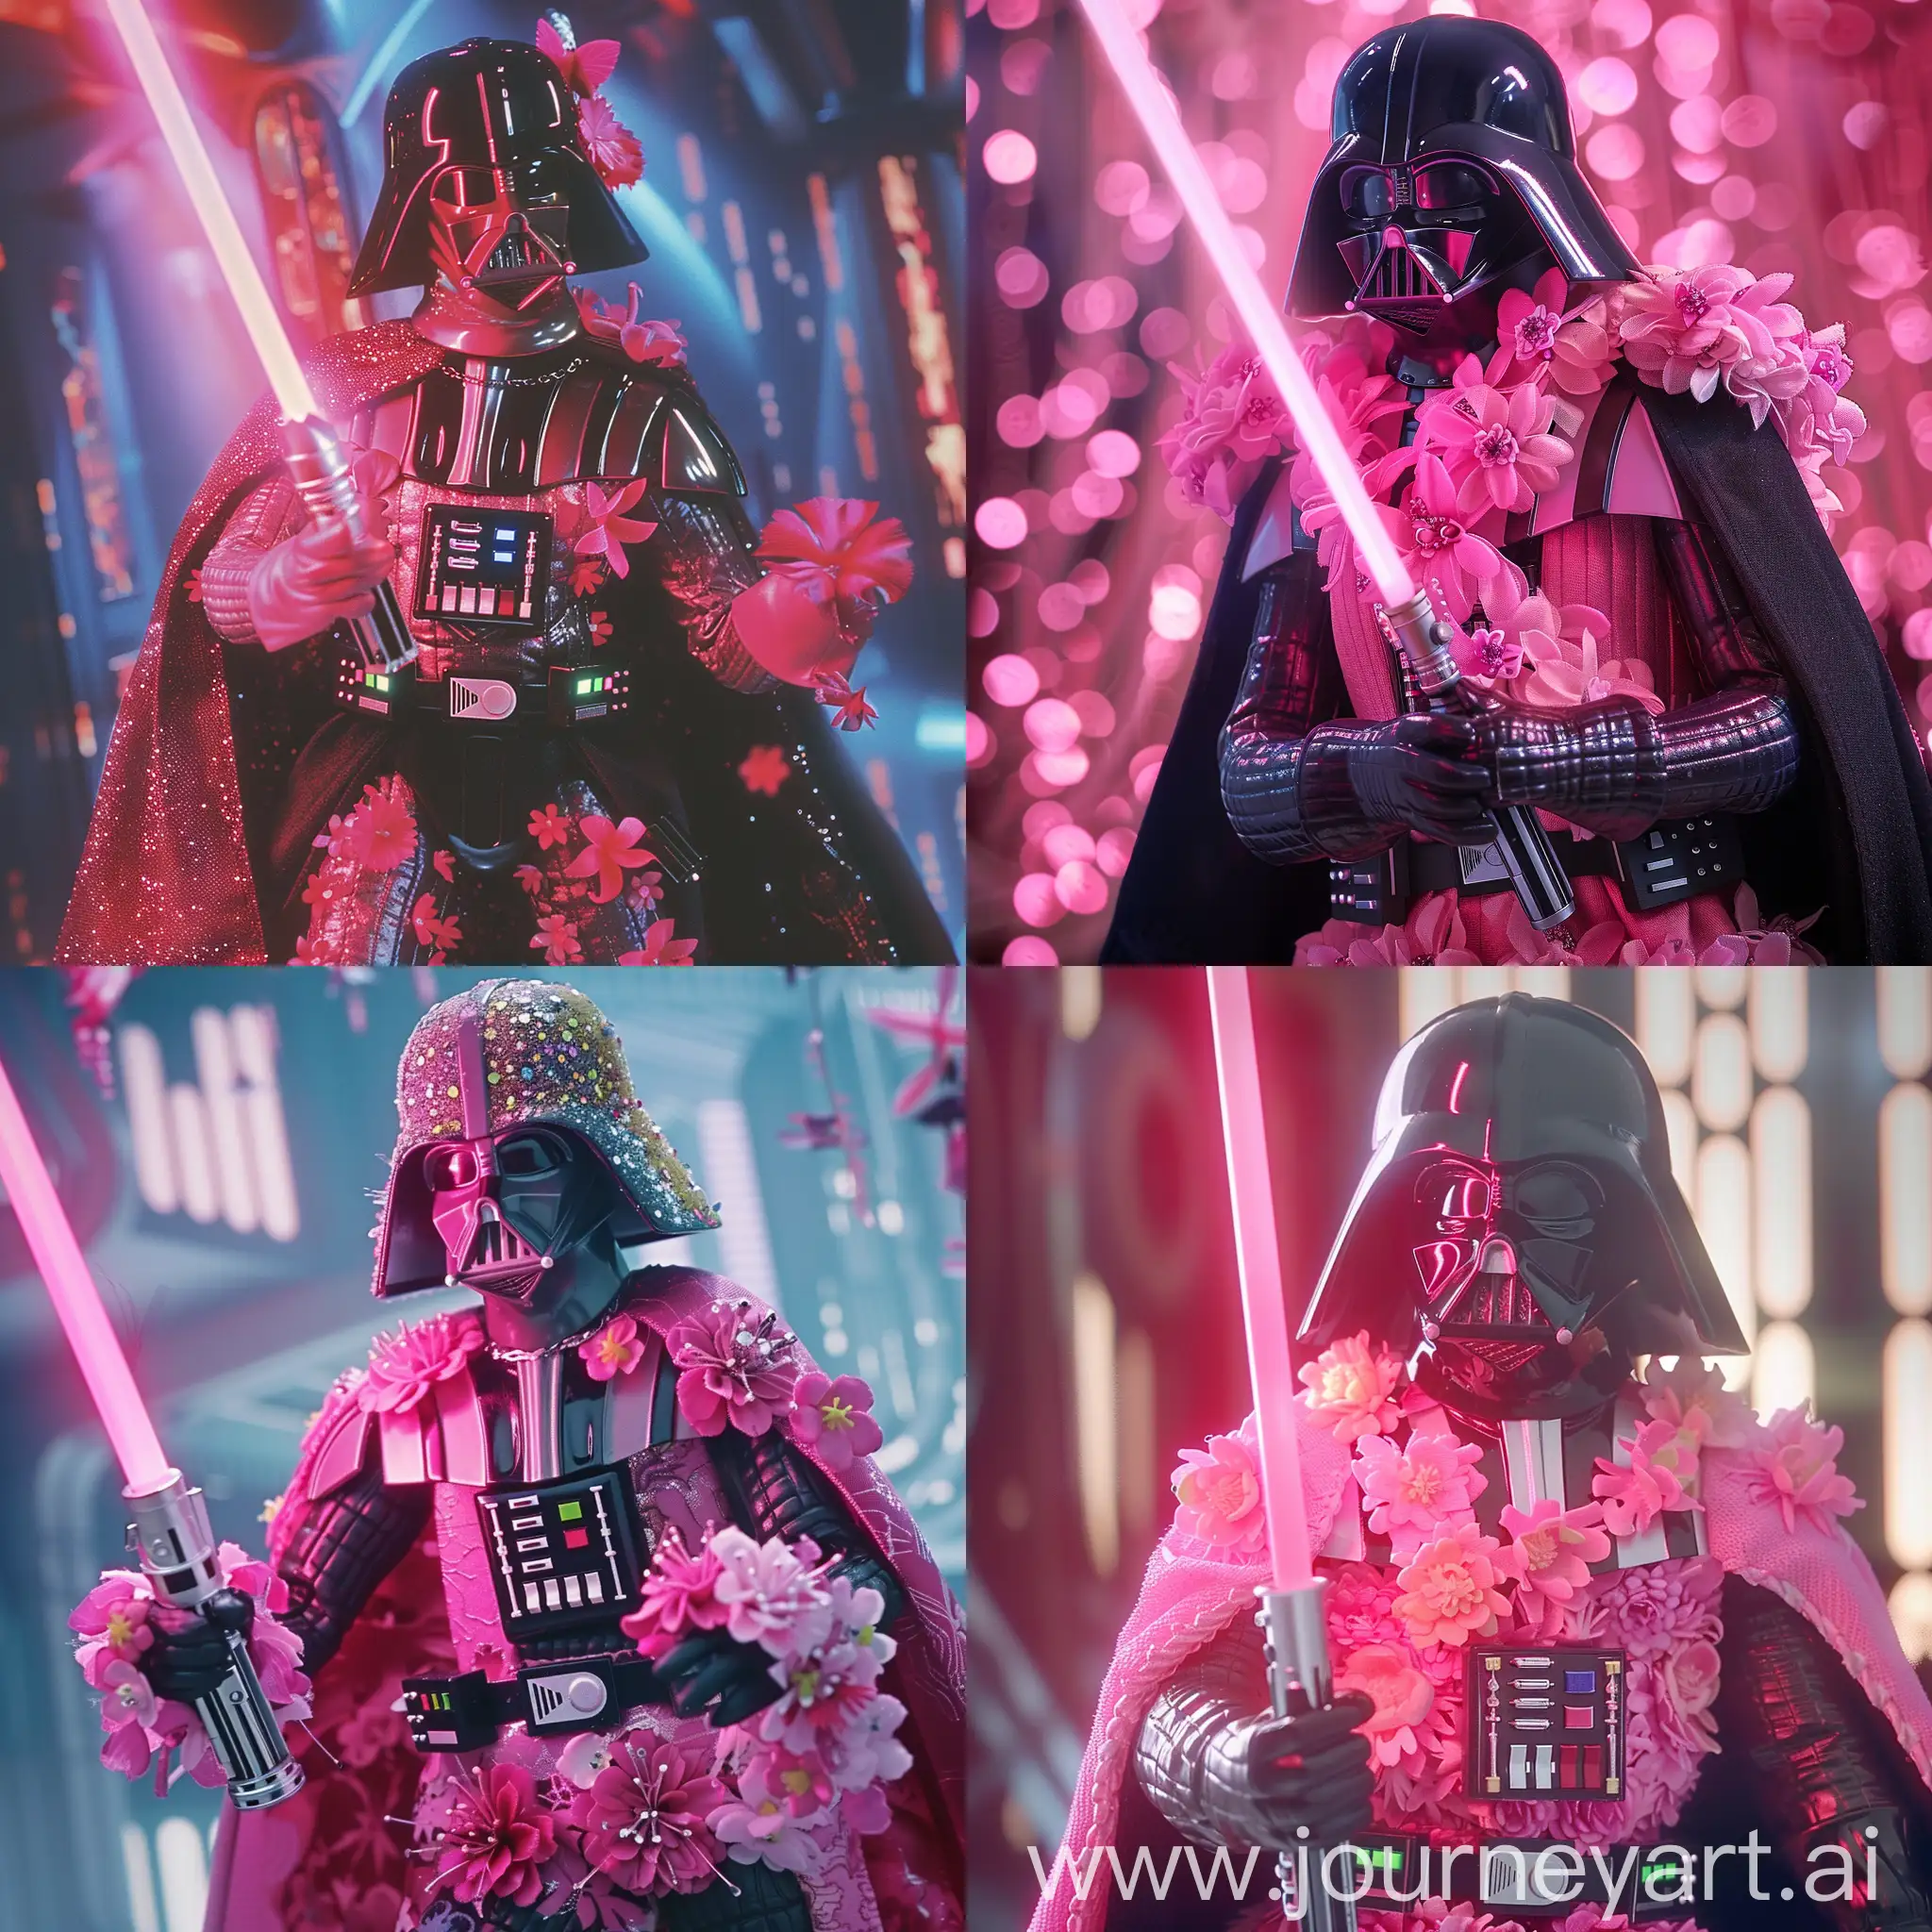 Darth Vader  in romantic genre film, dvd screenshot from anime film, barbie Vader wearing barbie (pink and romantic and flowery) costume, holding pink lightsaber and 80s romantic film composition --c 5